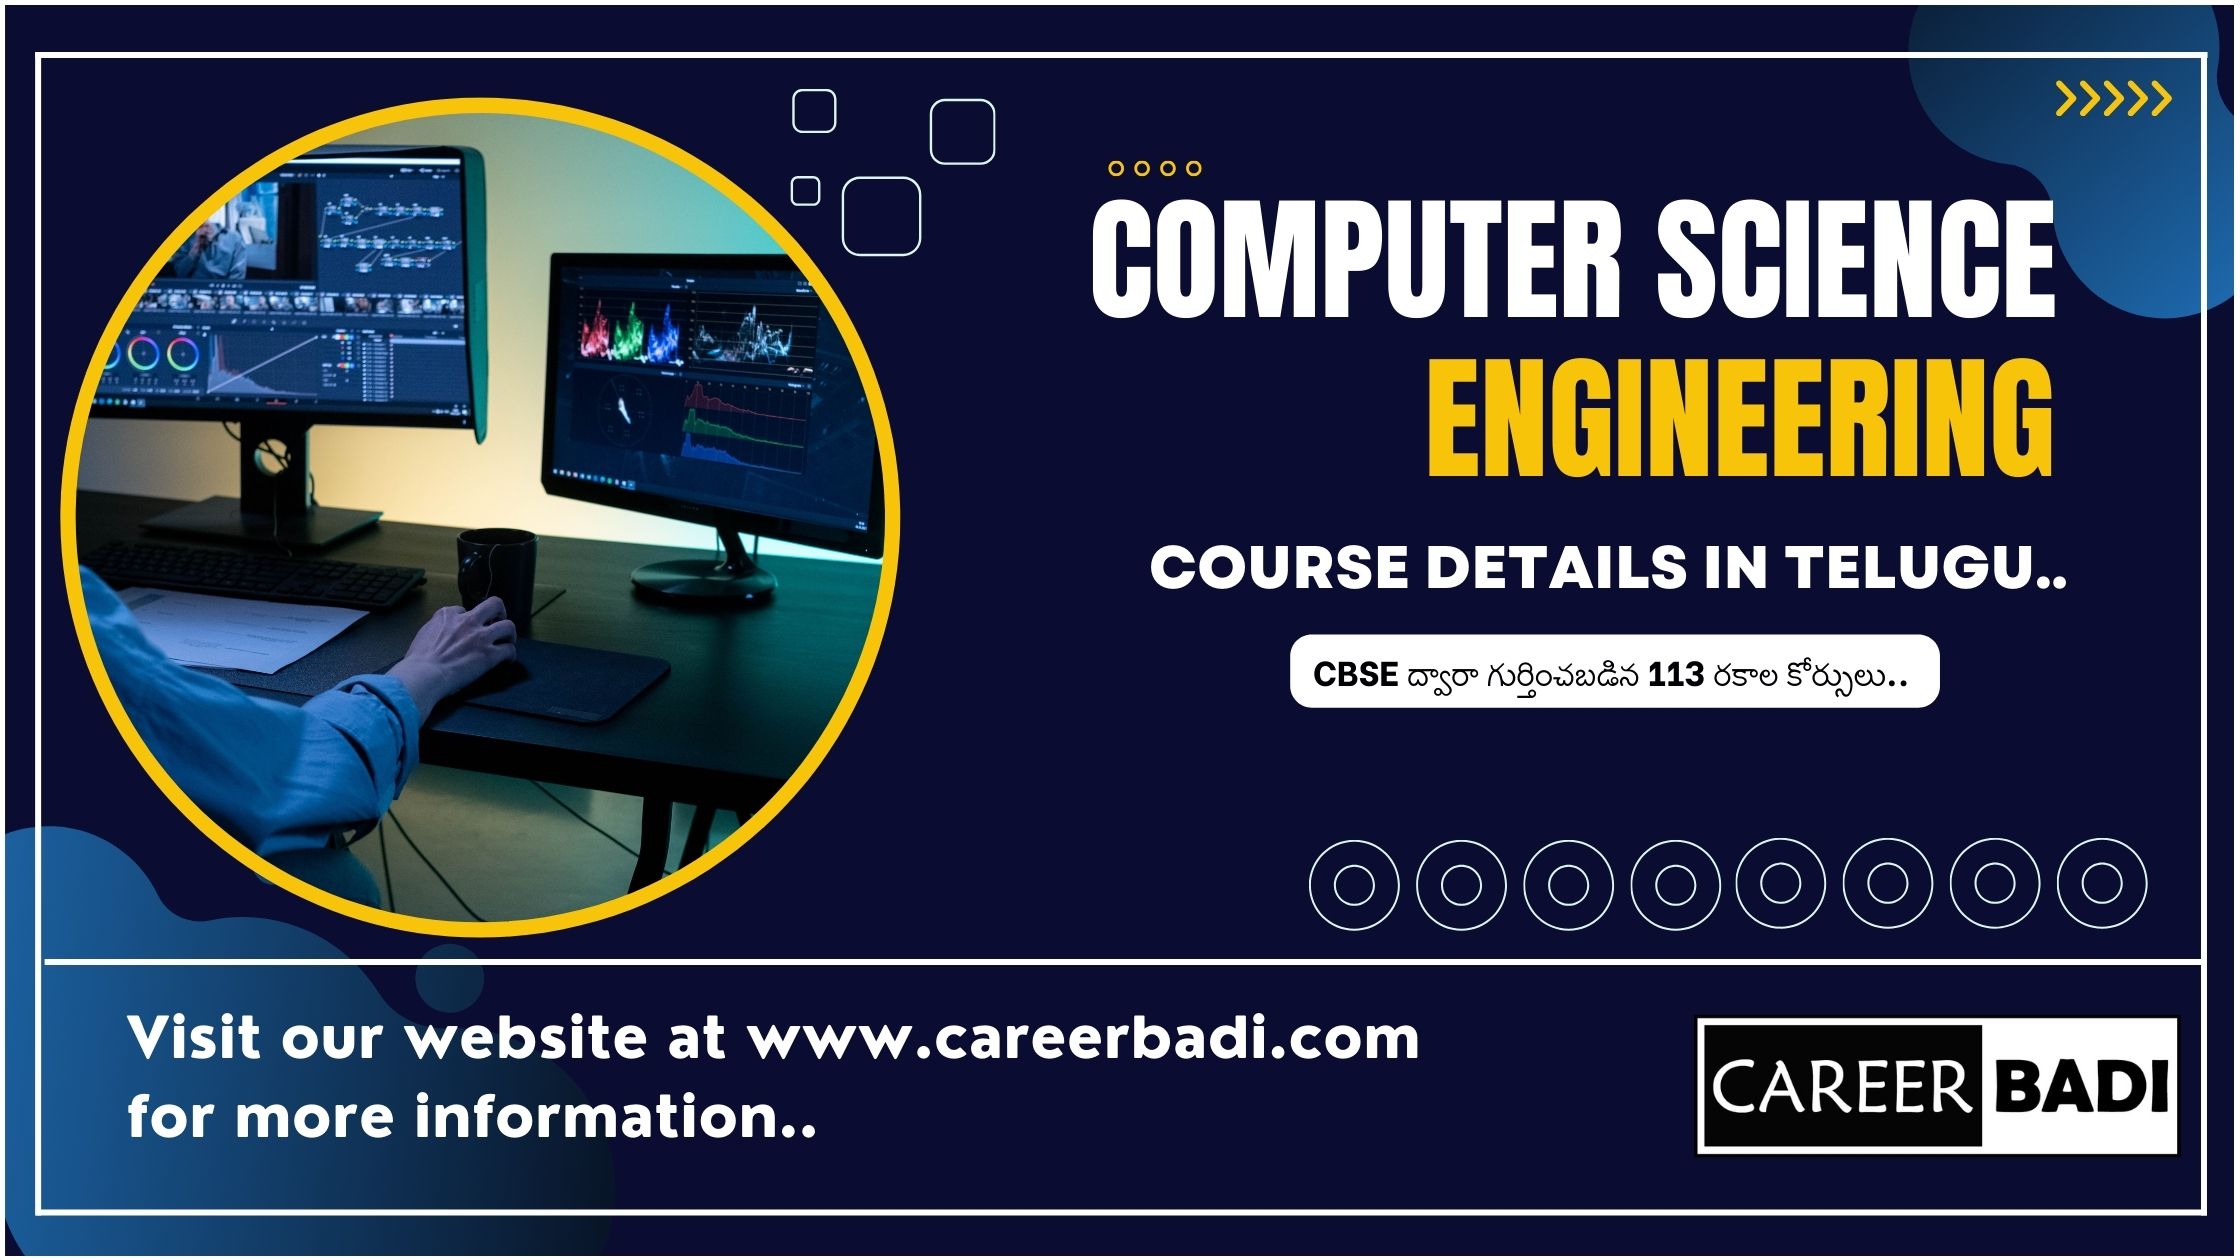 Computer Science Engineering Course Details in Telugu